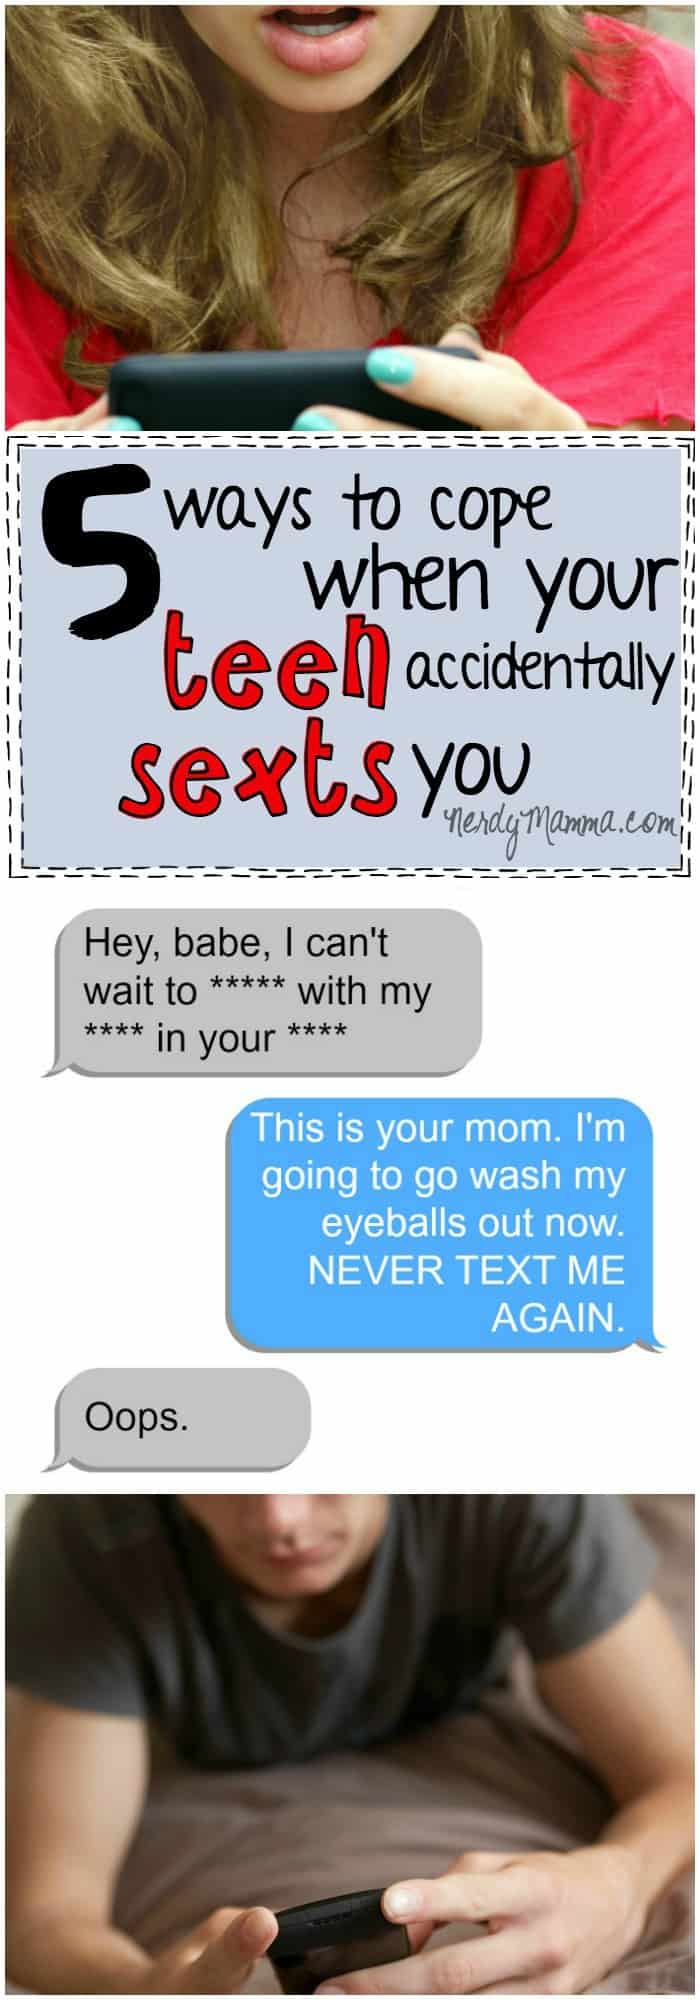 Oh no! This is the FUNNIEST set of ways to react if your teen son accidentally stexts you...Even the idea! But still! LOL!